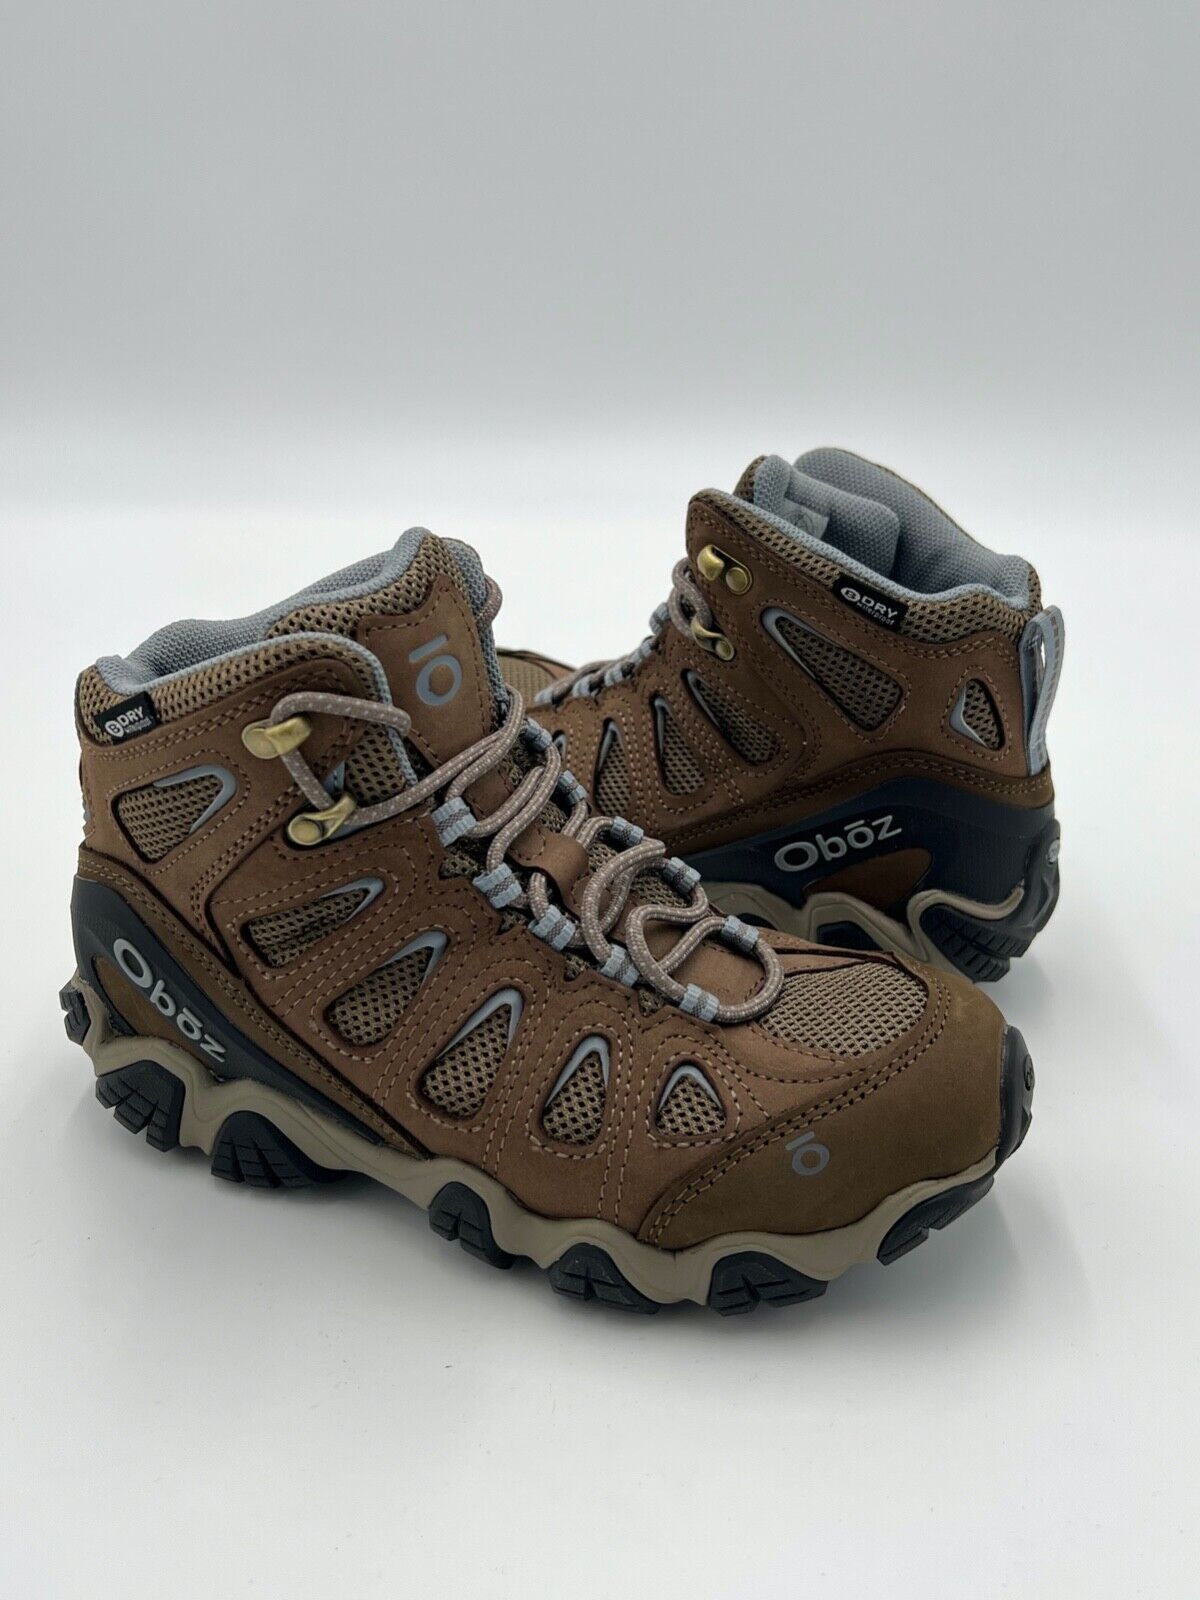 NEW iN box women’s Oboz Sawtooth Mid Waterproof Hiking Boots - size 10 